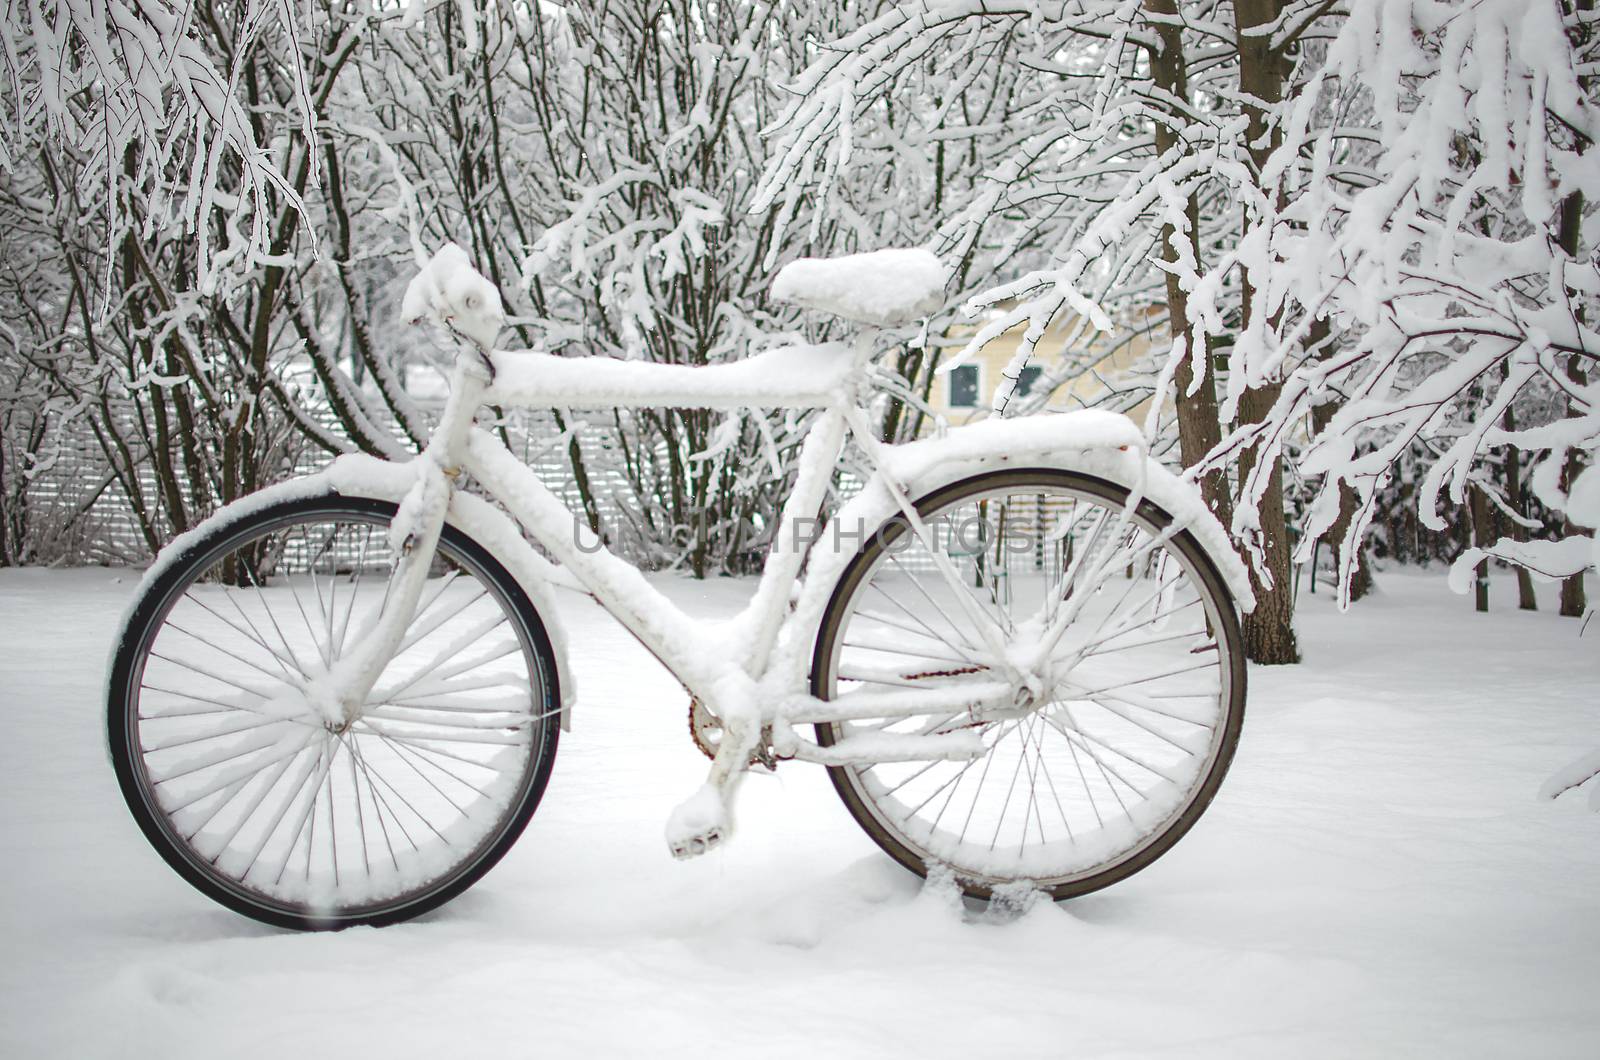 Abandoned bike or bicycle with snow cover in winter. Bike buried in snow. Snowstorm forecast. Winter in the city